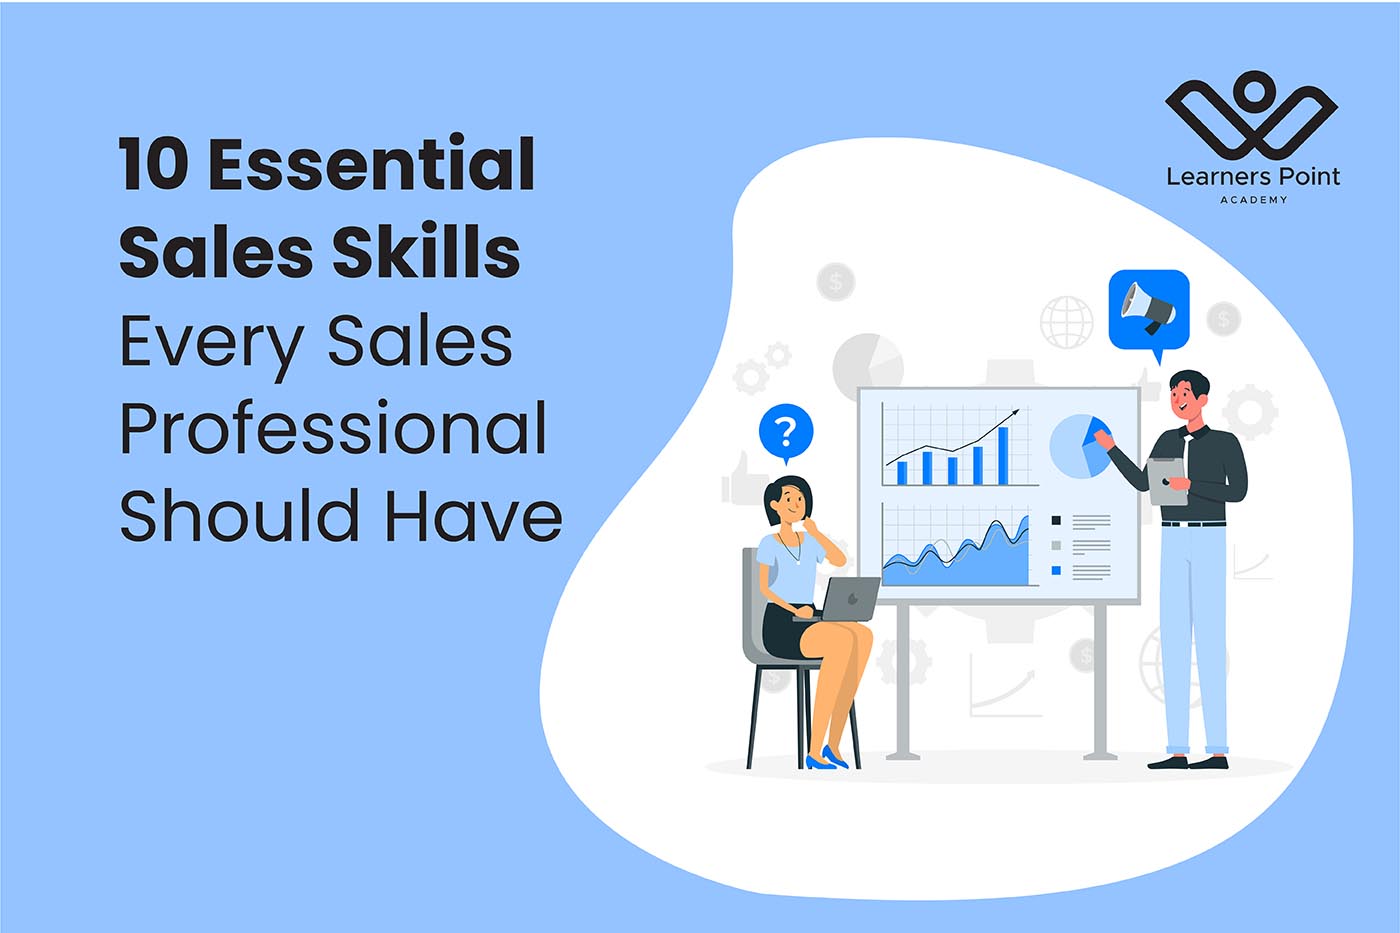 10 Essential Sales Skills Every Sales Professional Should Have